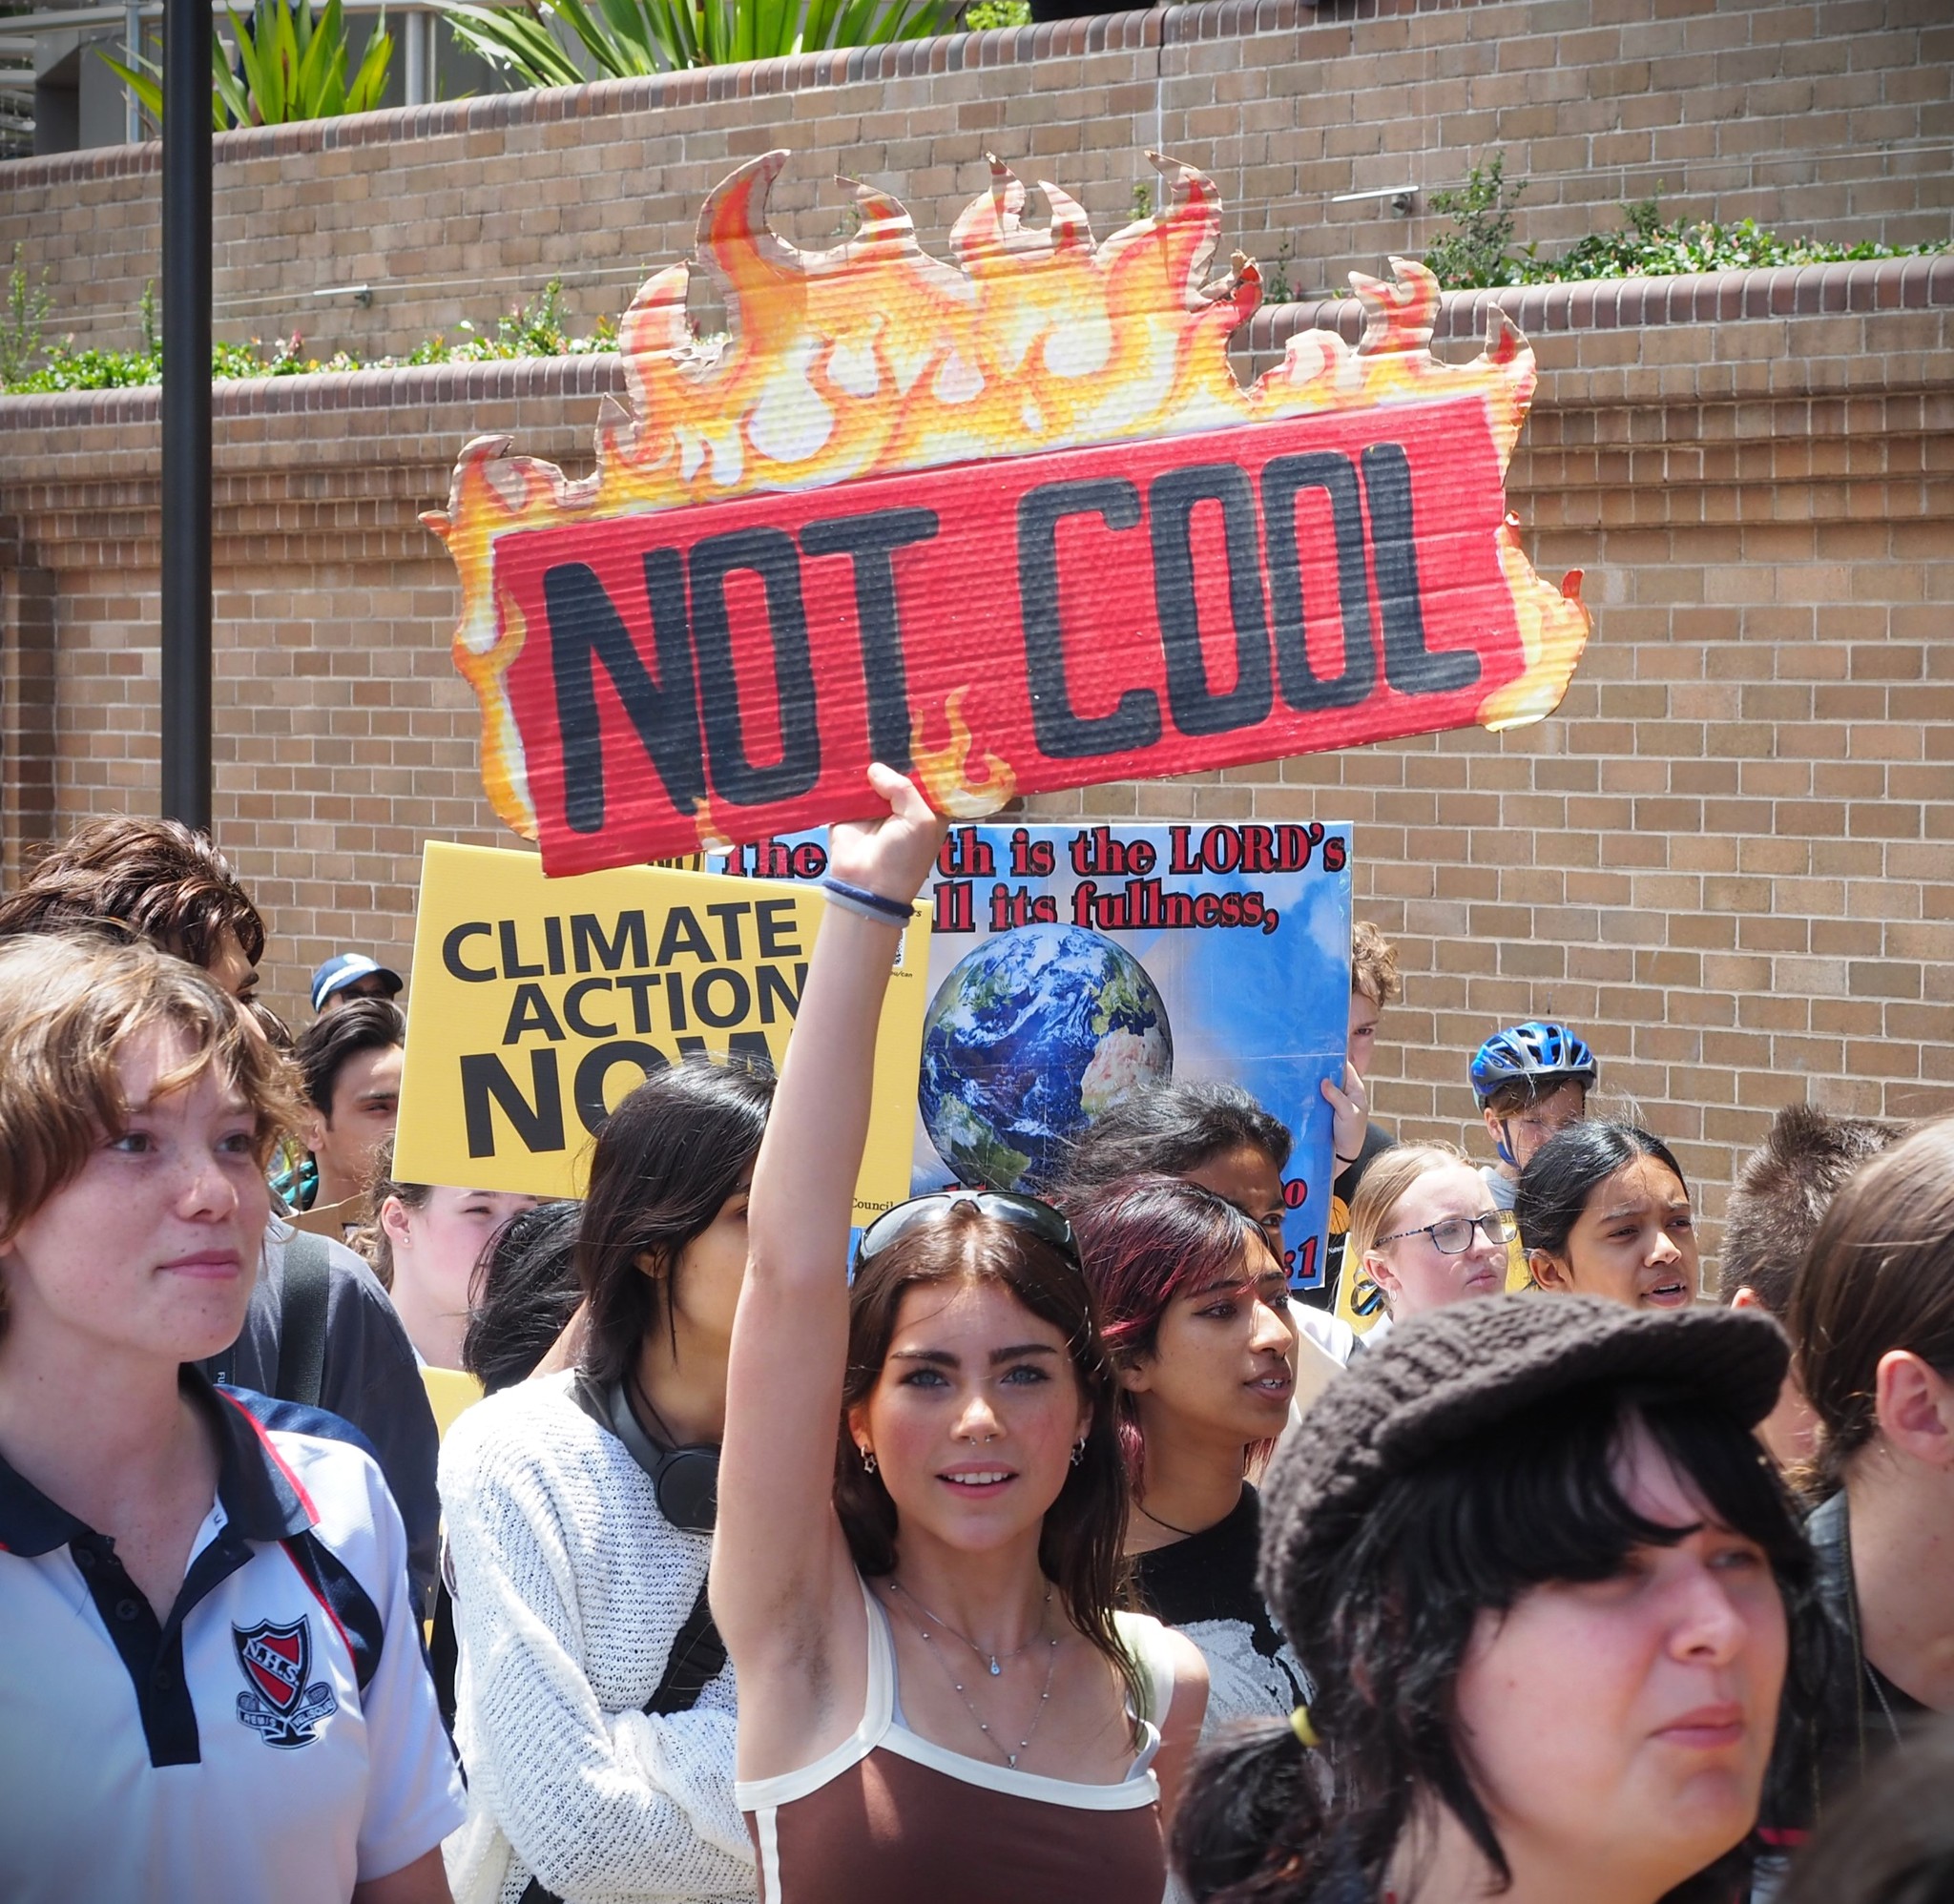 Young people are determined to fight for climate action